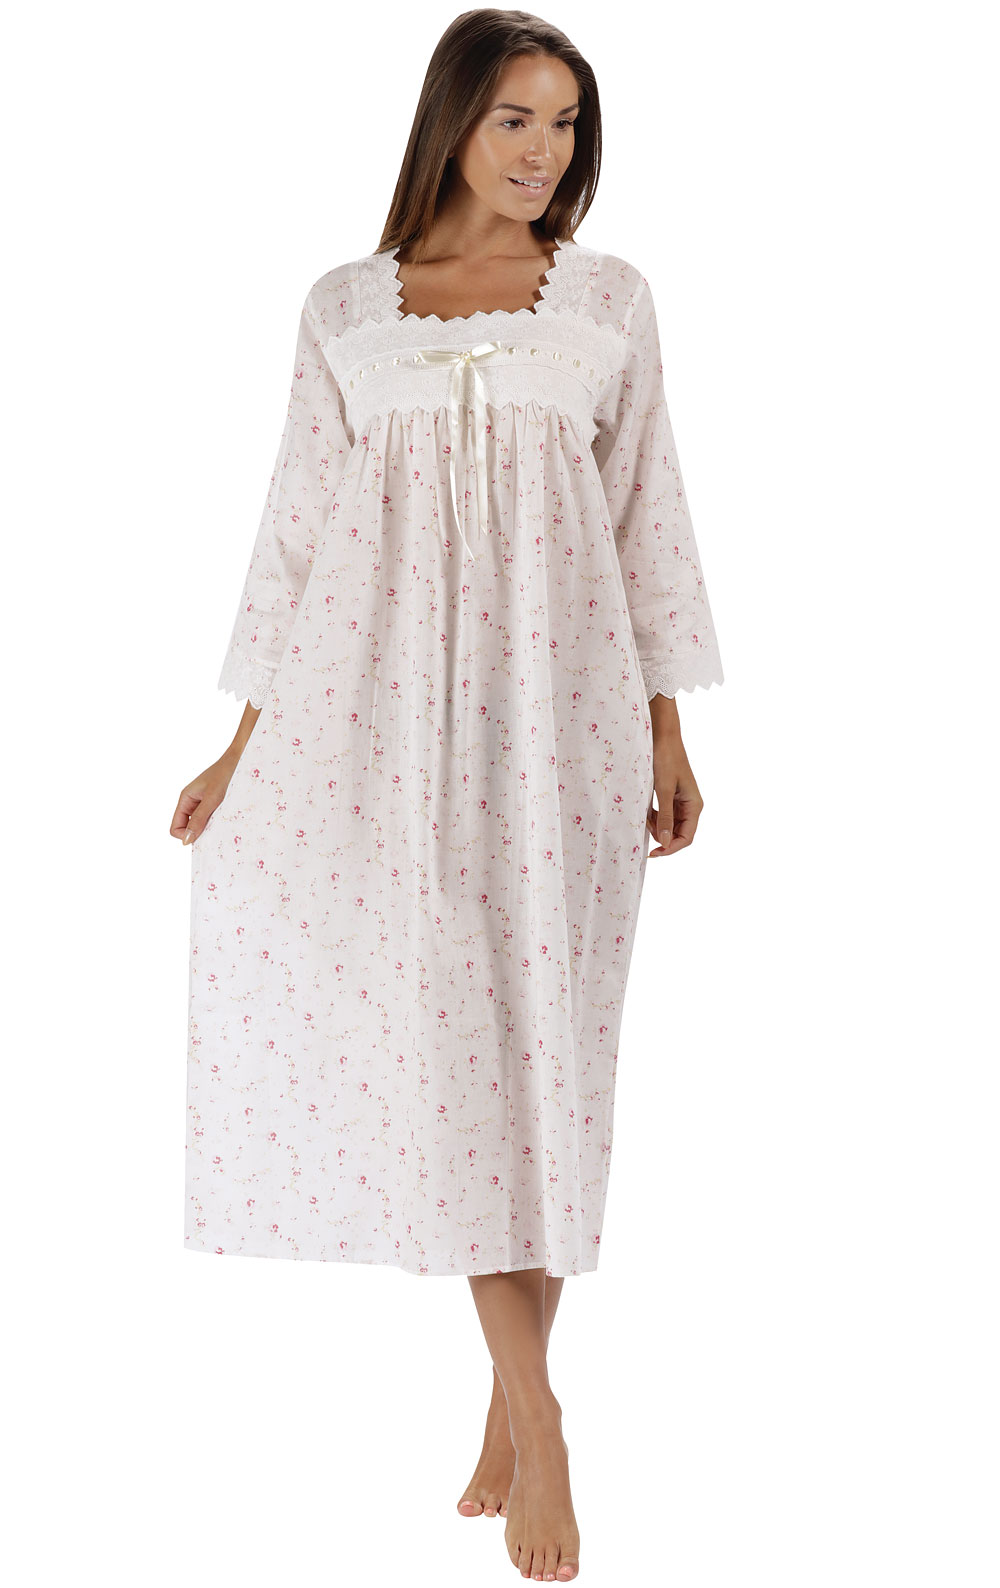 3/4 Sleeve Nightgown, Cotton Nightgowns for Women